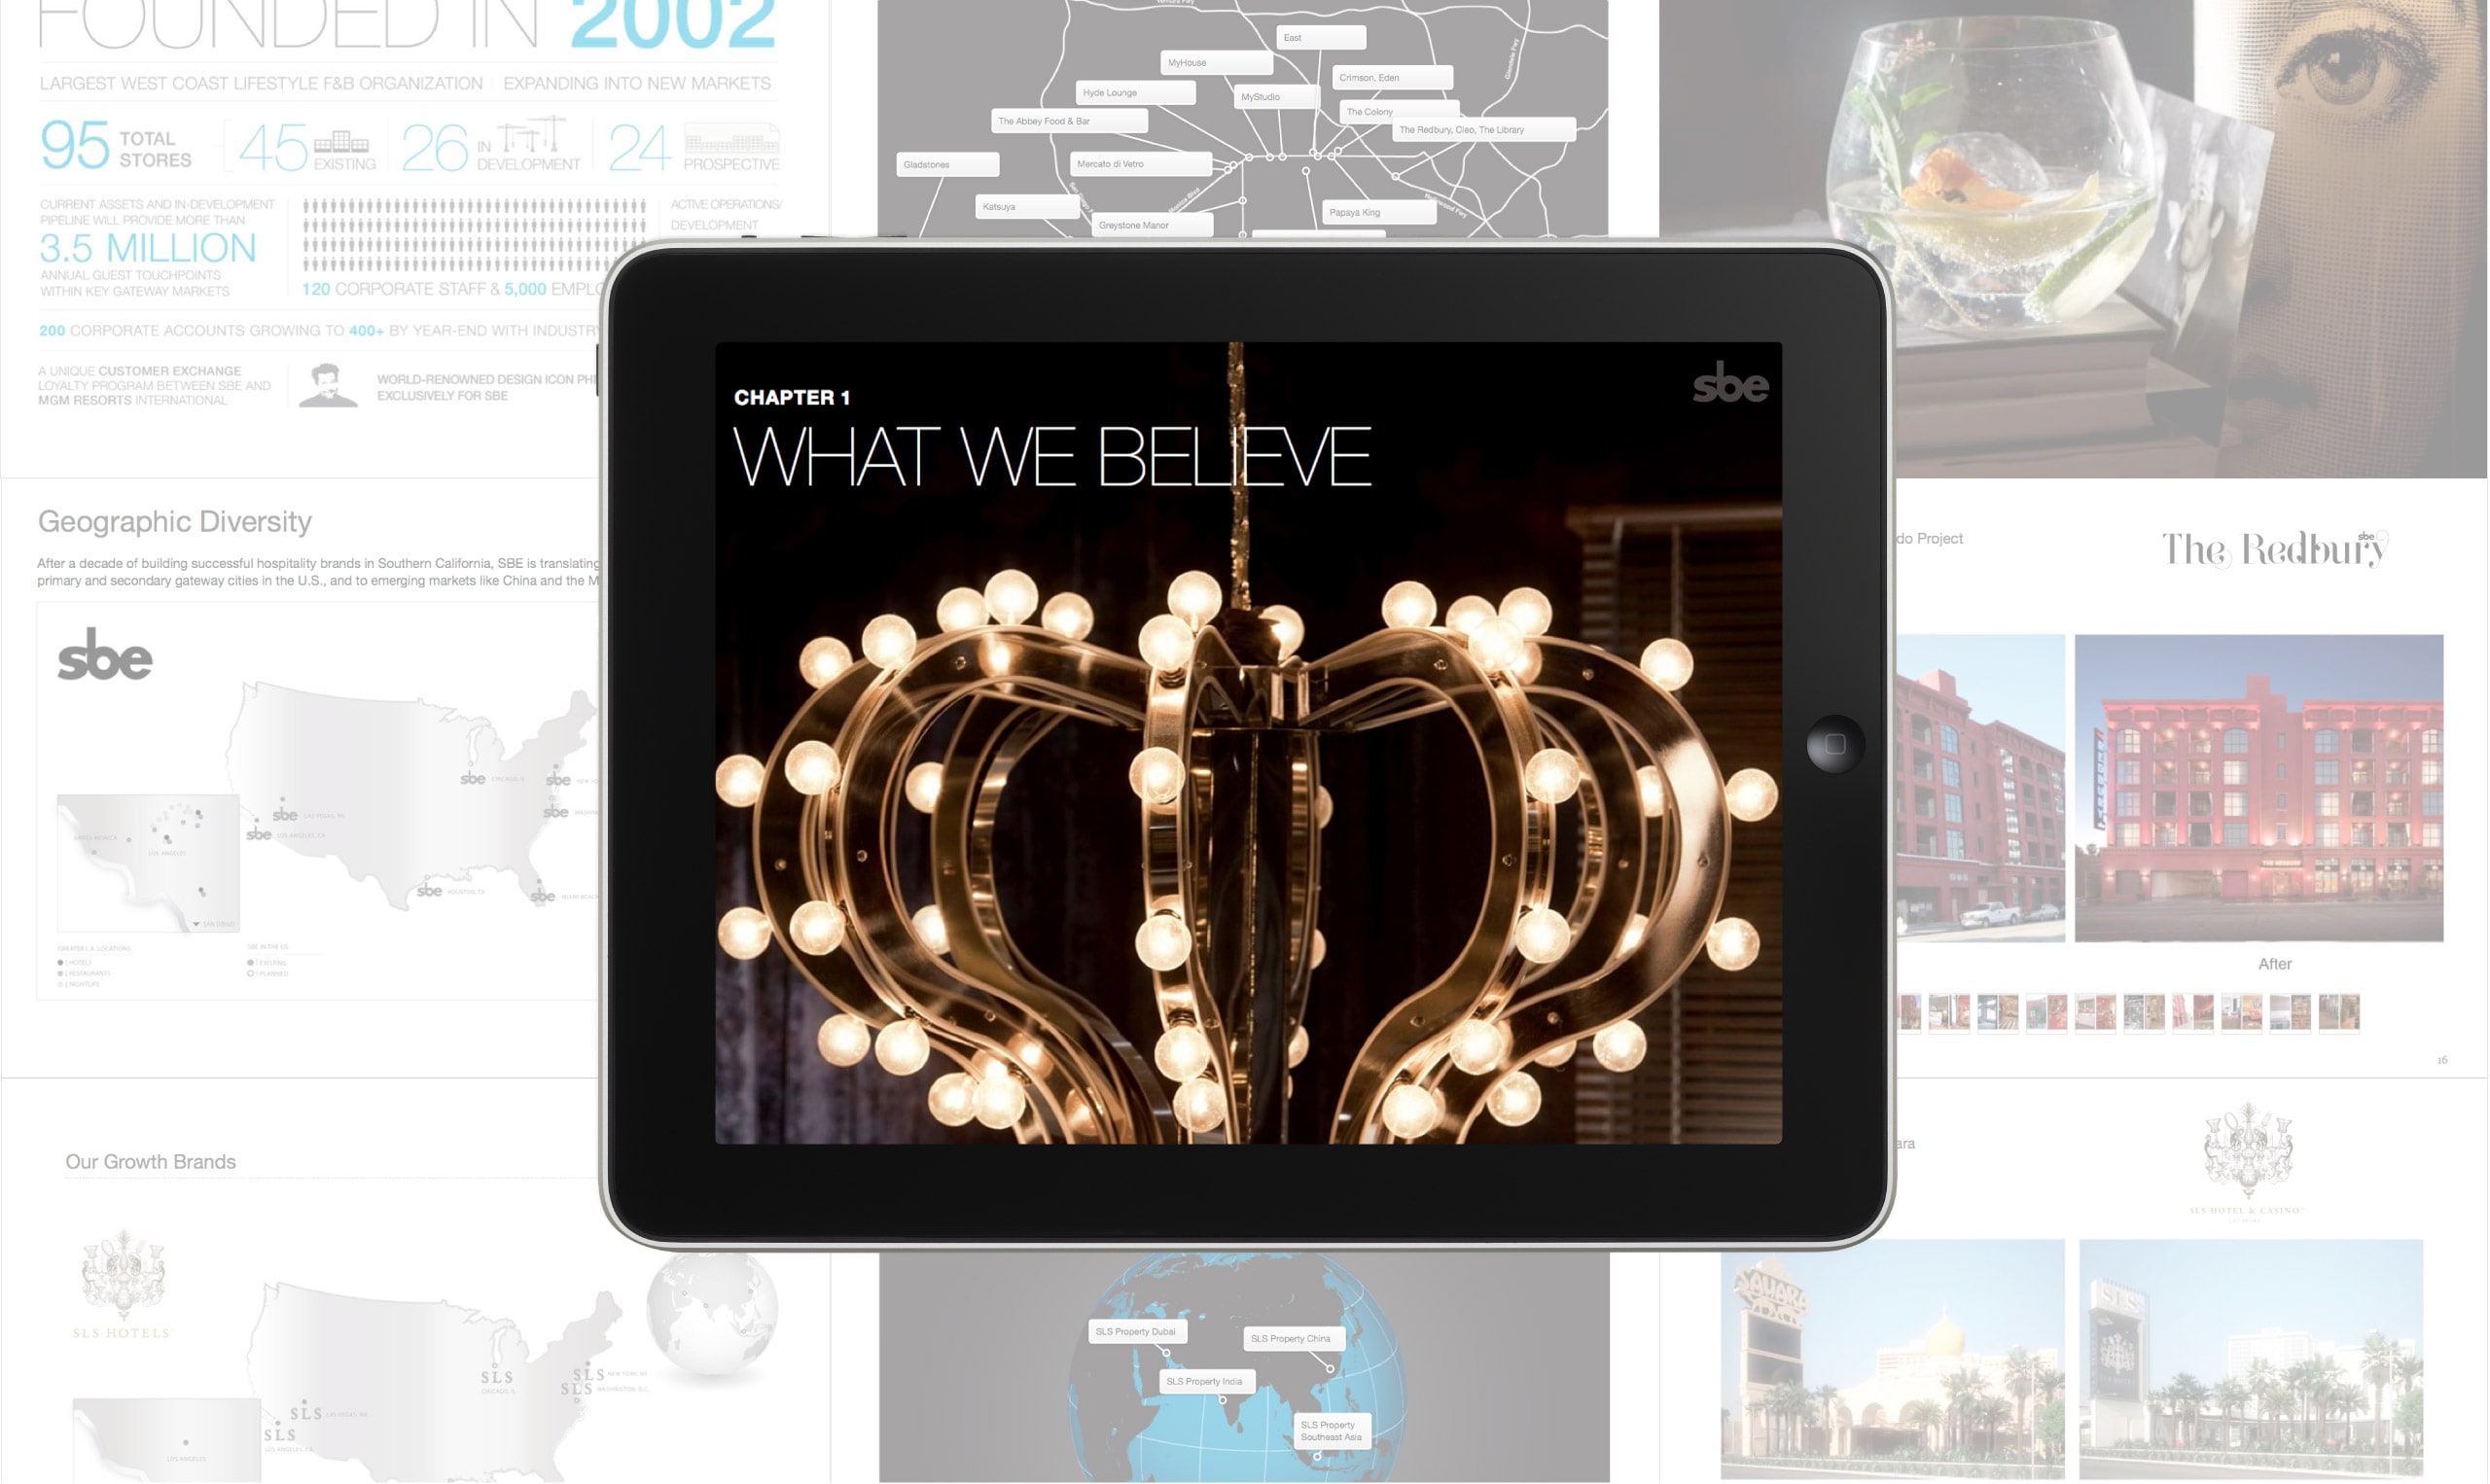 An ipad with a picture of chandelier image for brand development.